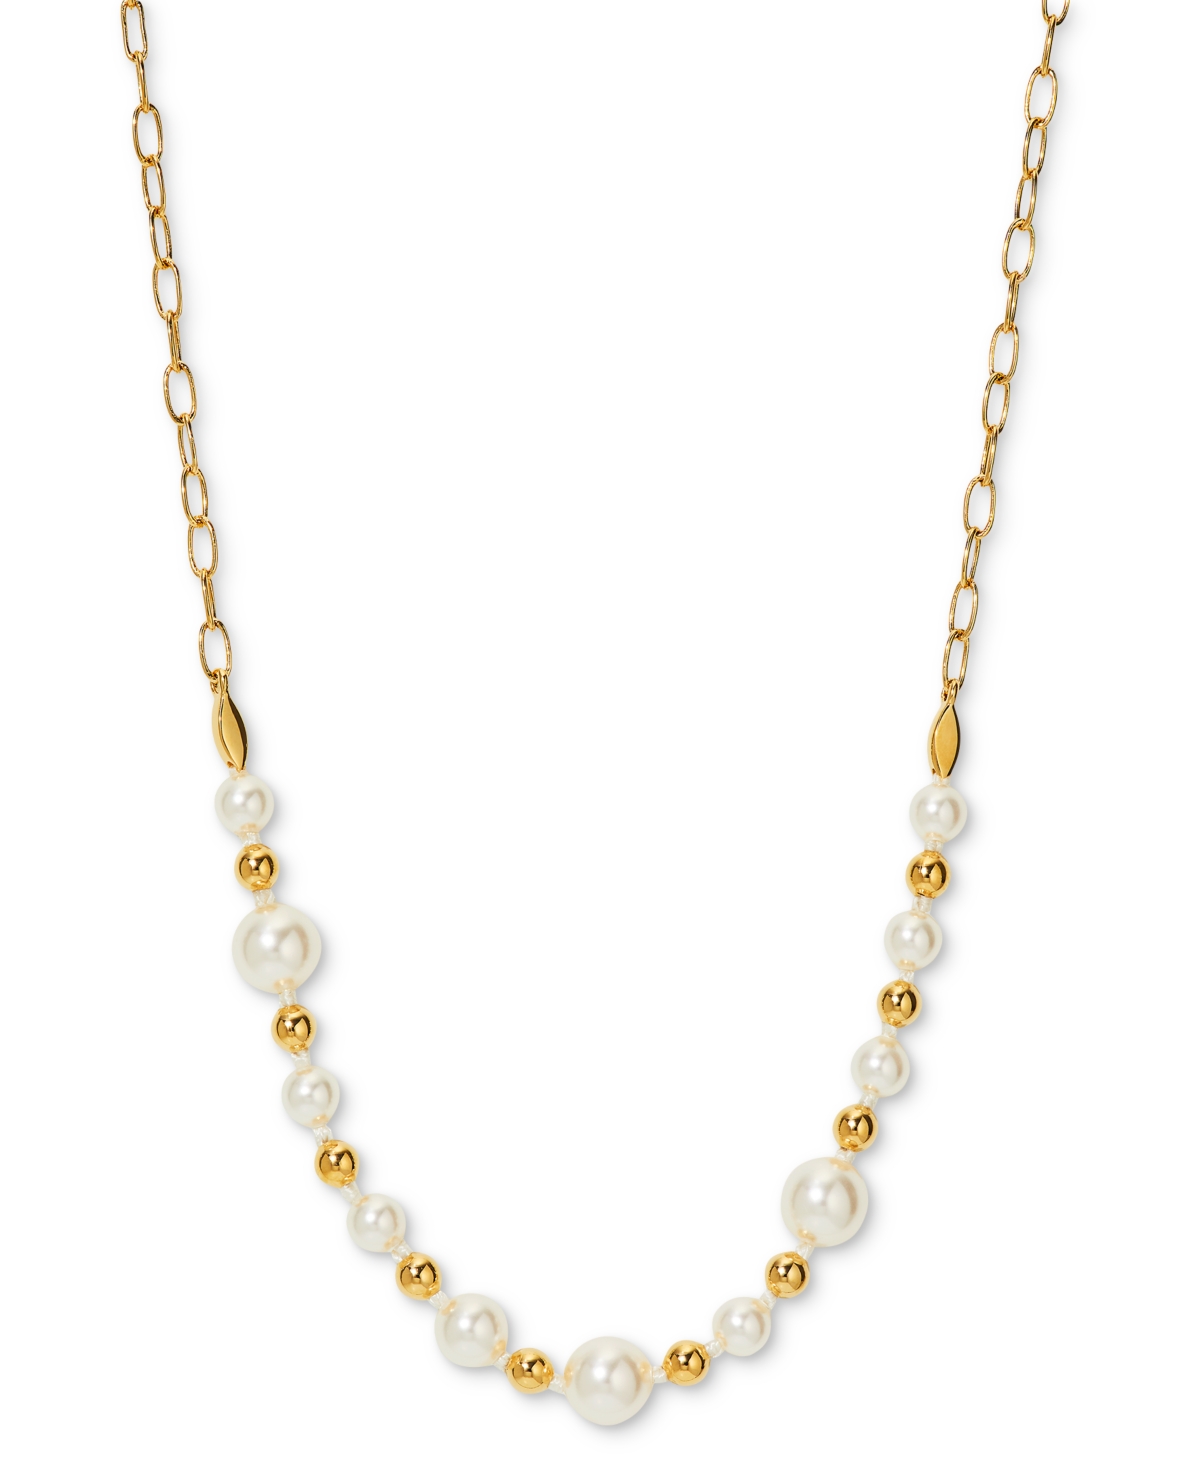 Ajoa by Nadri 18k Gold-Plated Imitation Pearl Statement Necklace, 16" + 2" extender - Gold